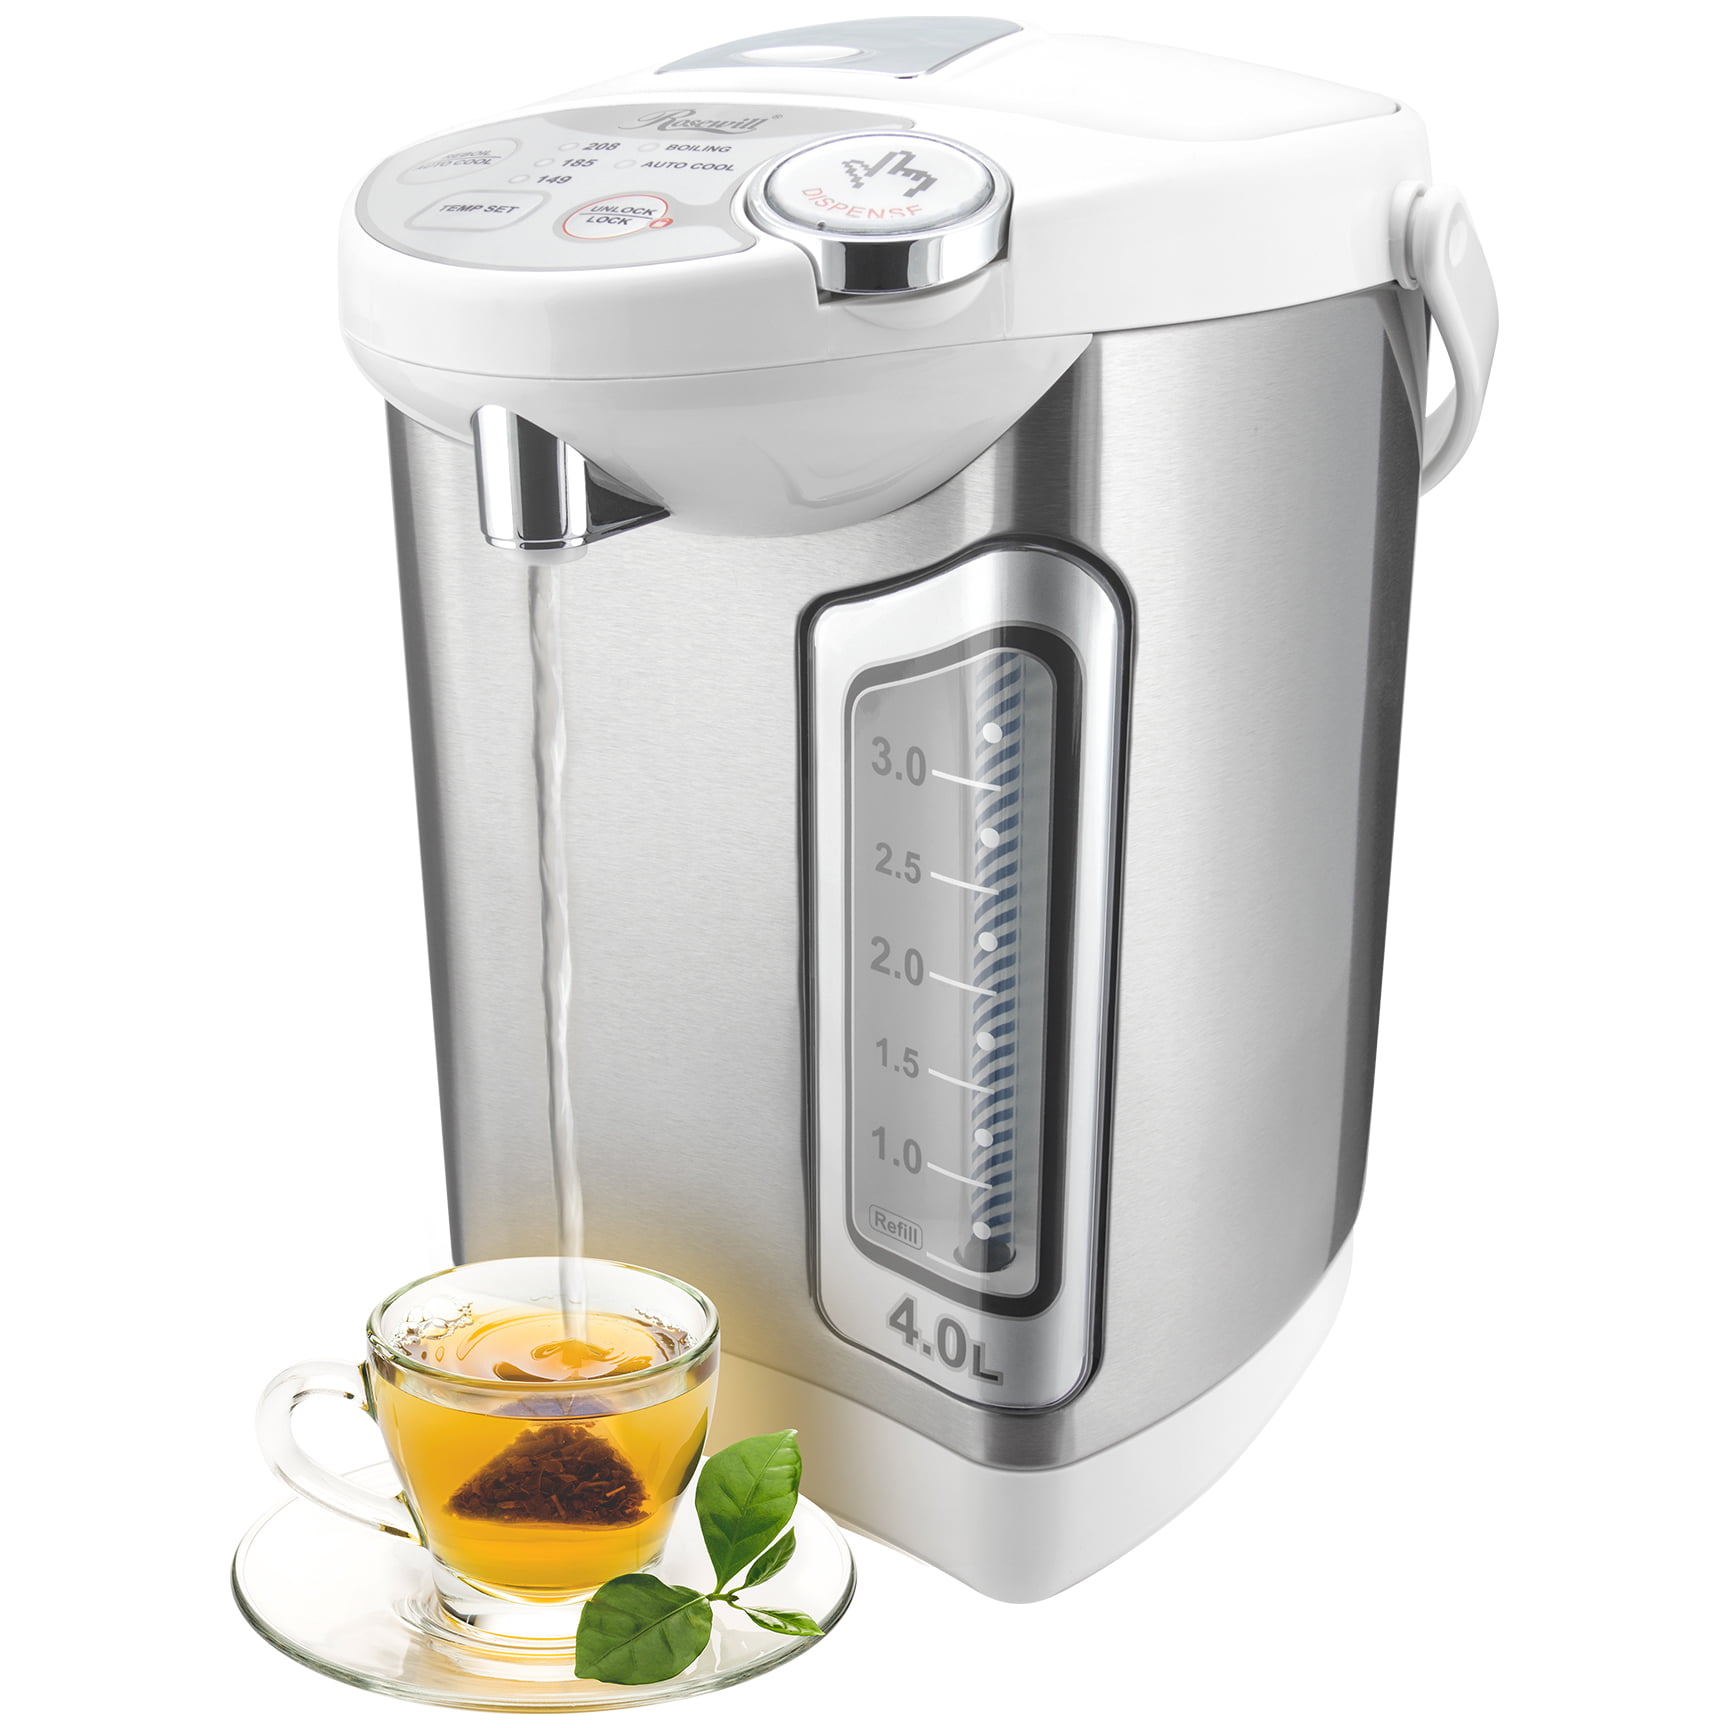 How to Select a Right Commercial Water Boiler and Bubble Tea Dispenser Pump?